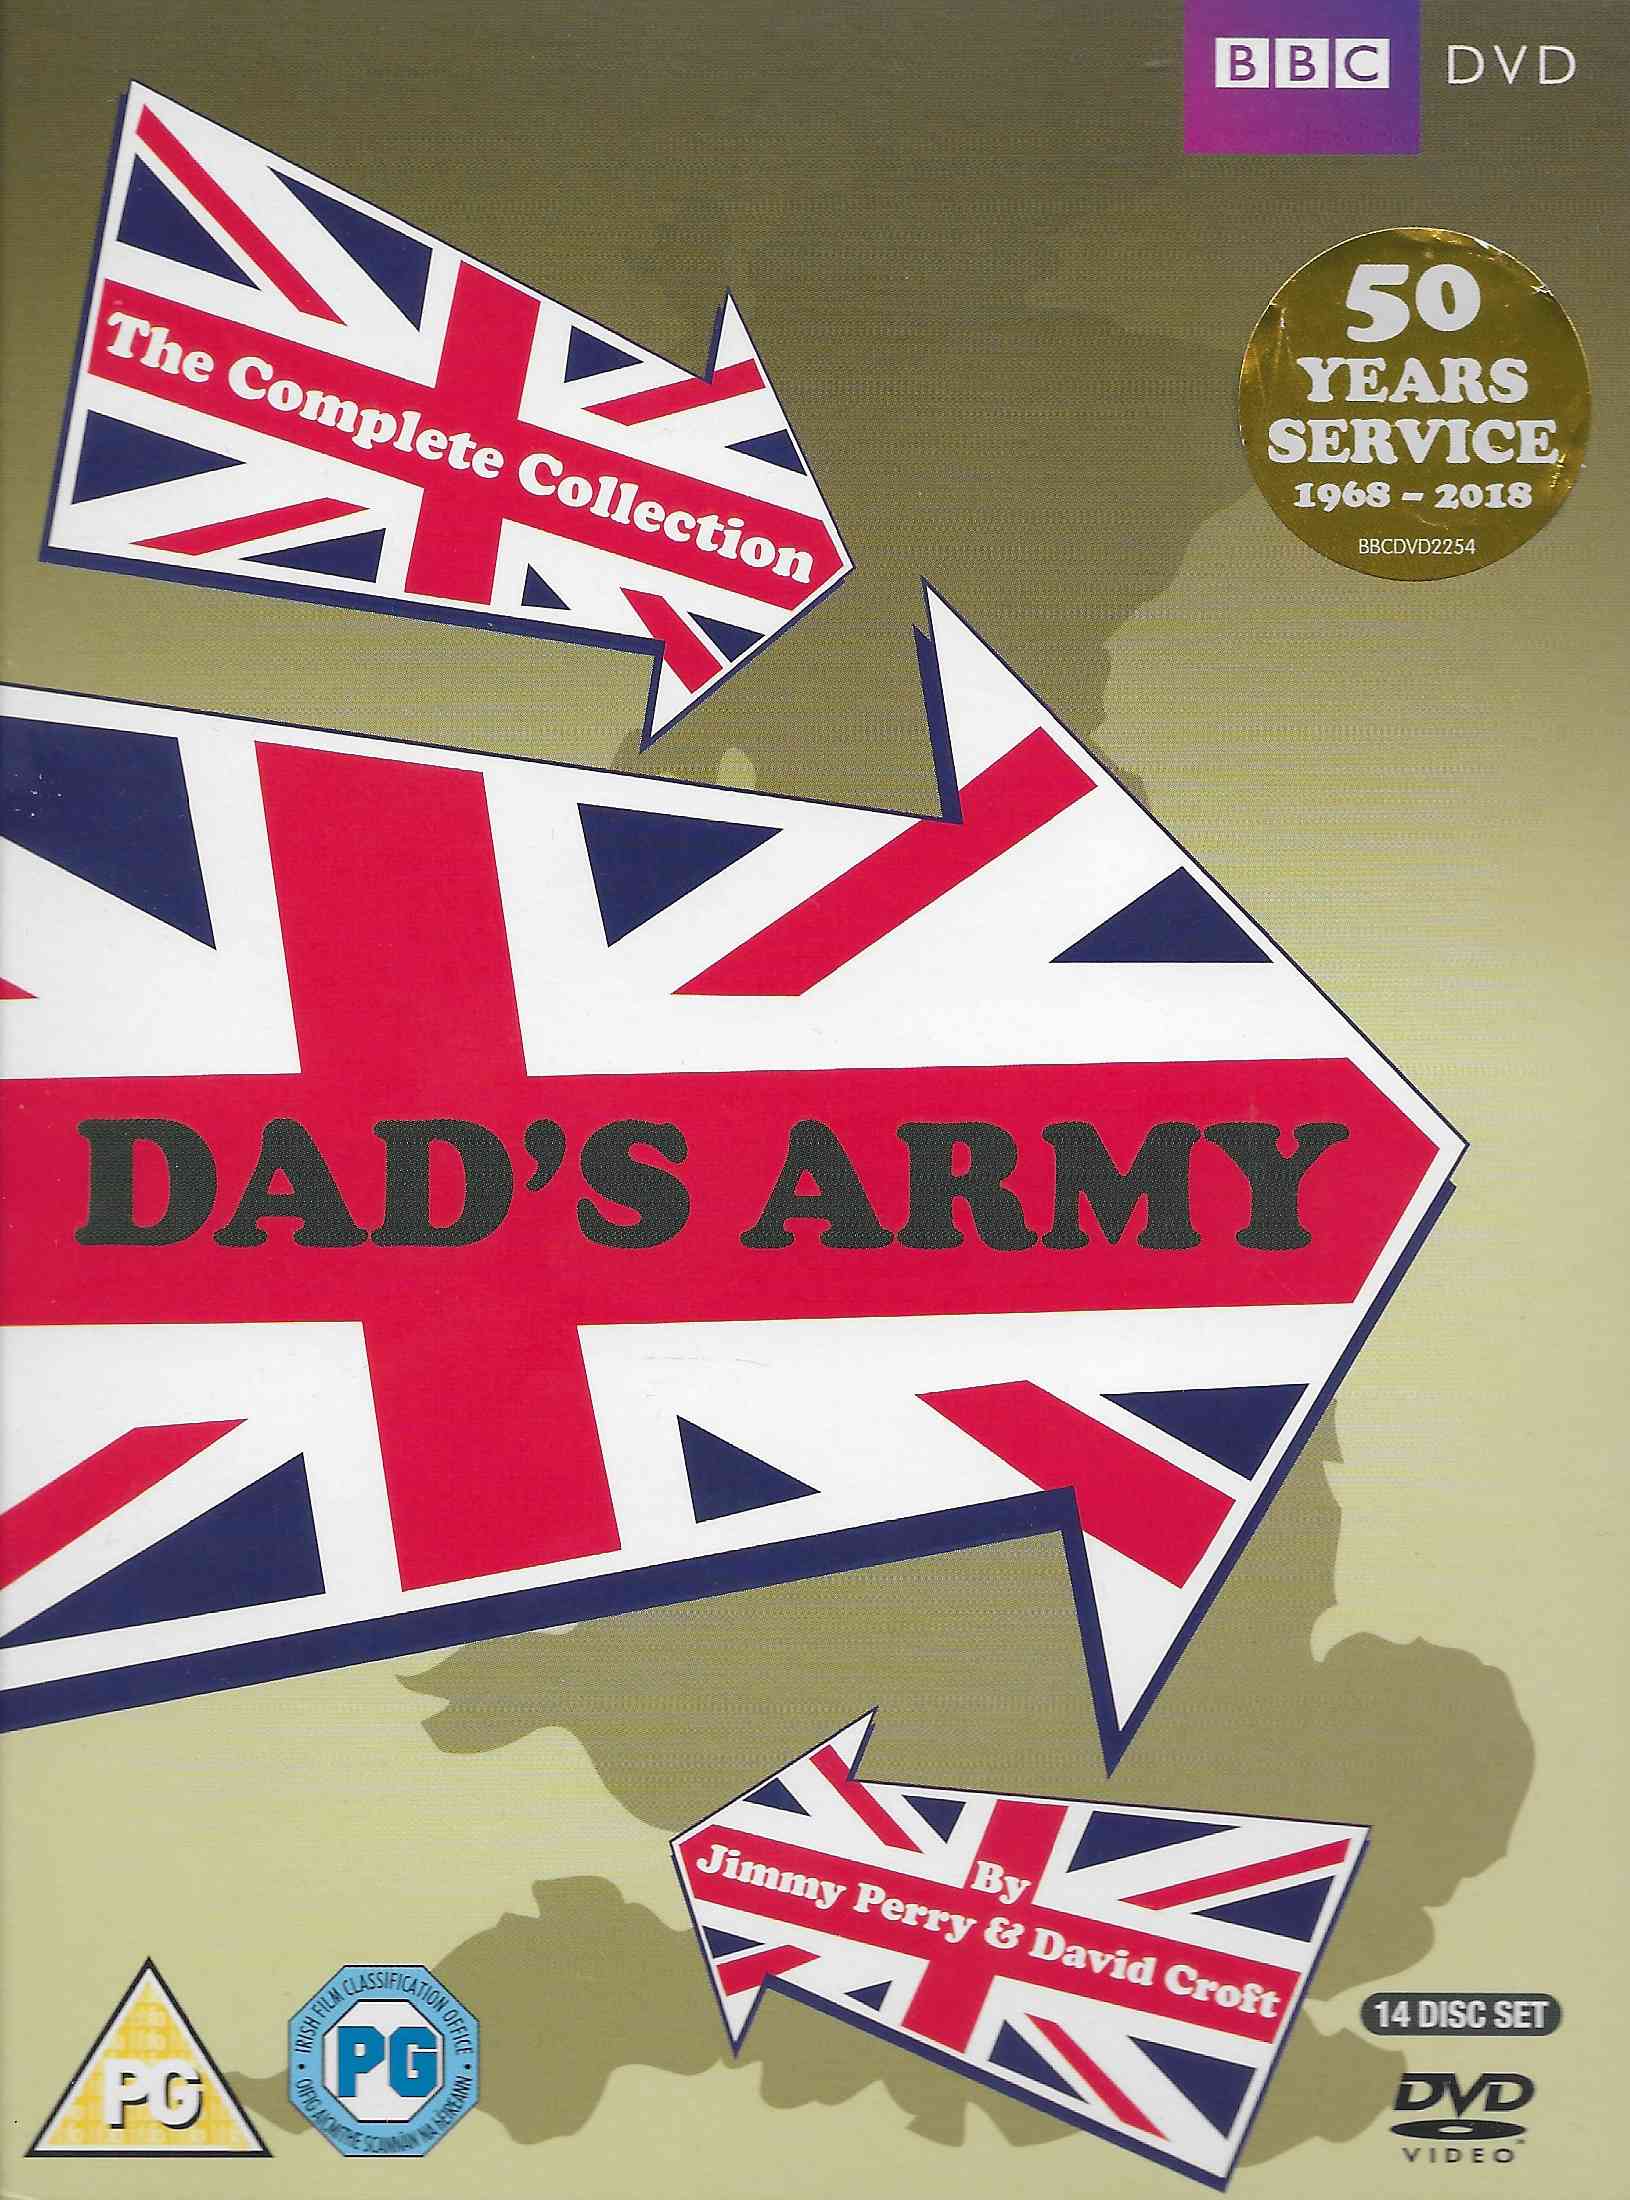 Picture of BBCDVD 2254 Dad's army - The complete collection by artist Jimmy Perry / David Croft from the BBC dvds - Records and Tapes library